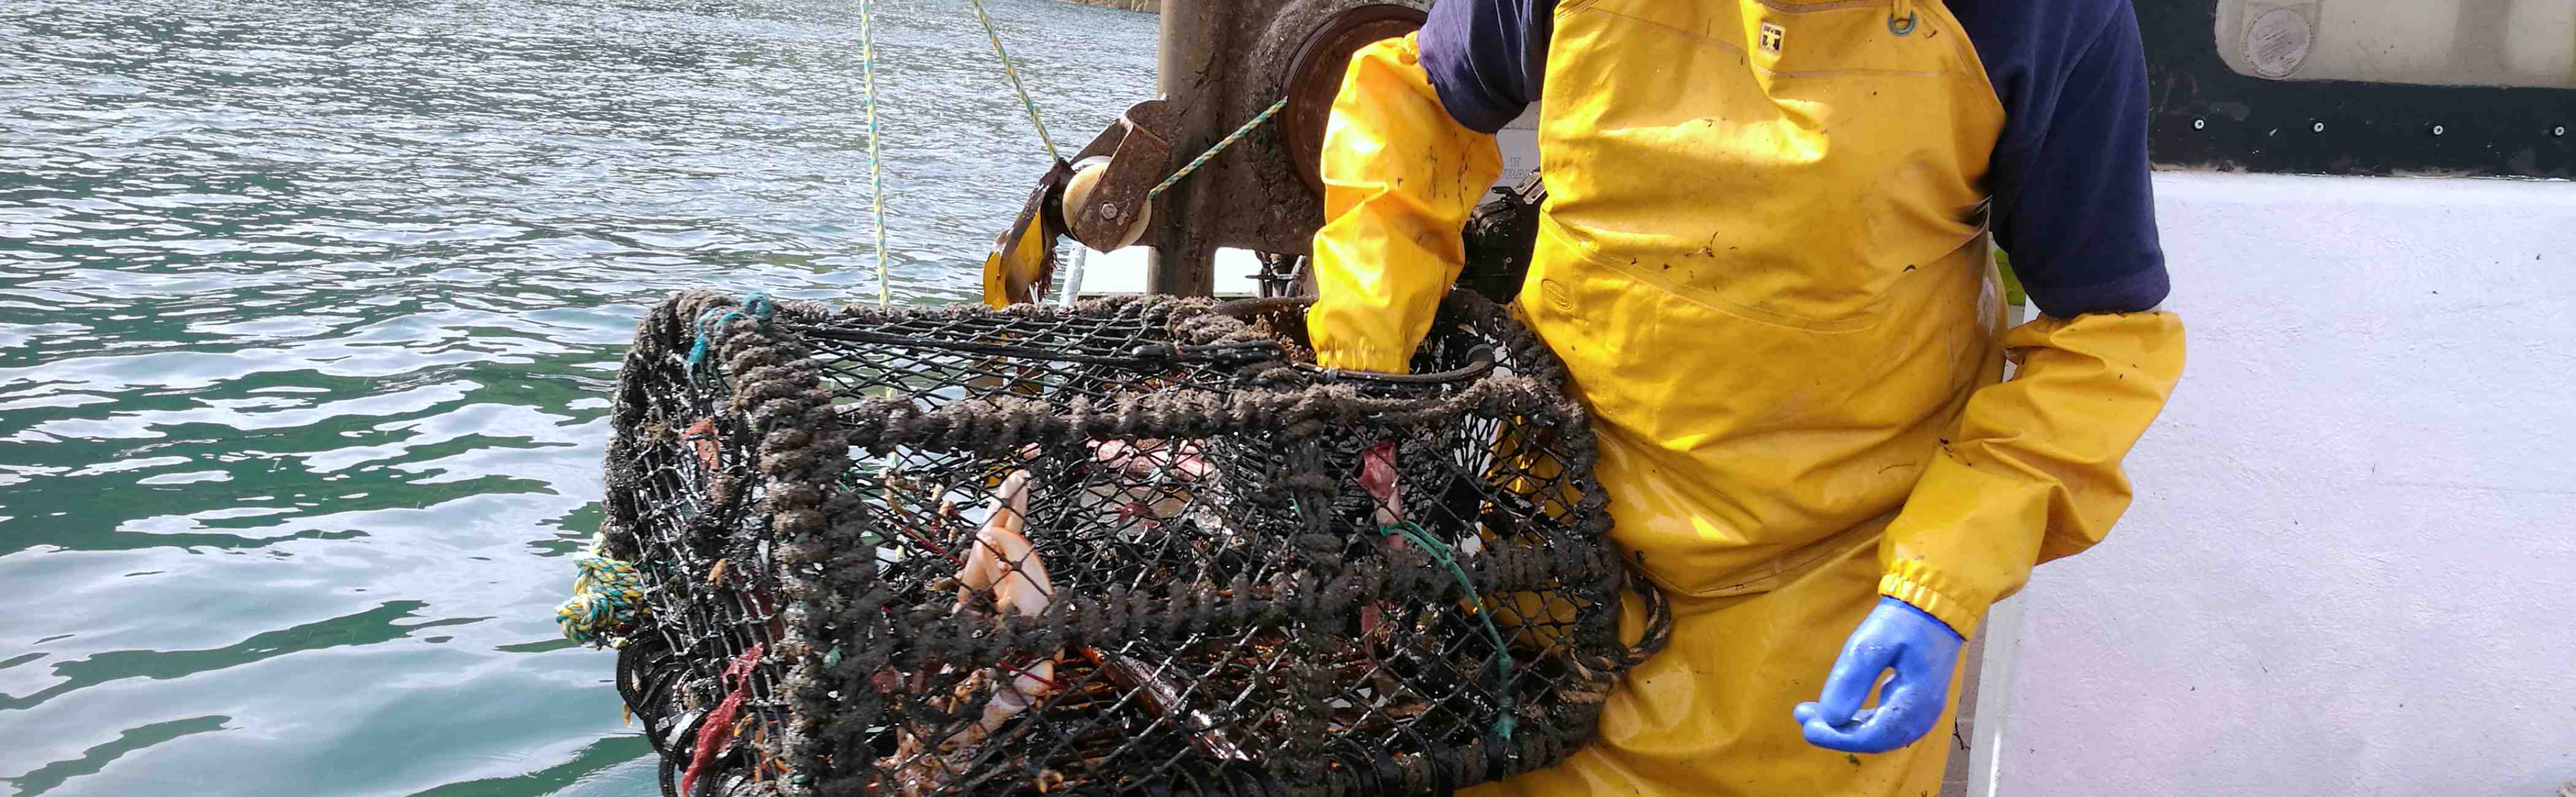 Fresh shellfish being caught on a boat.